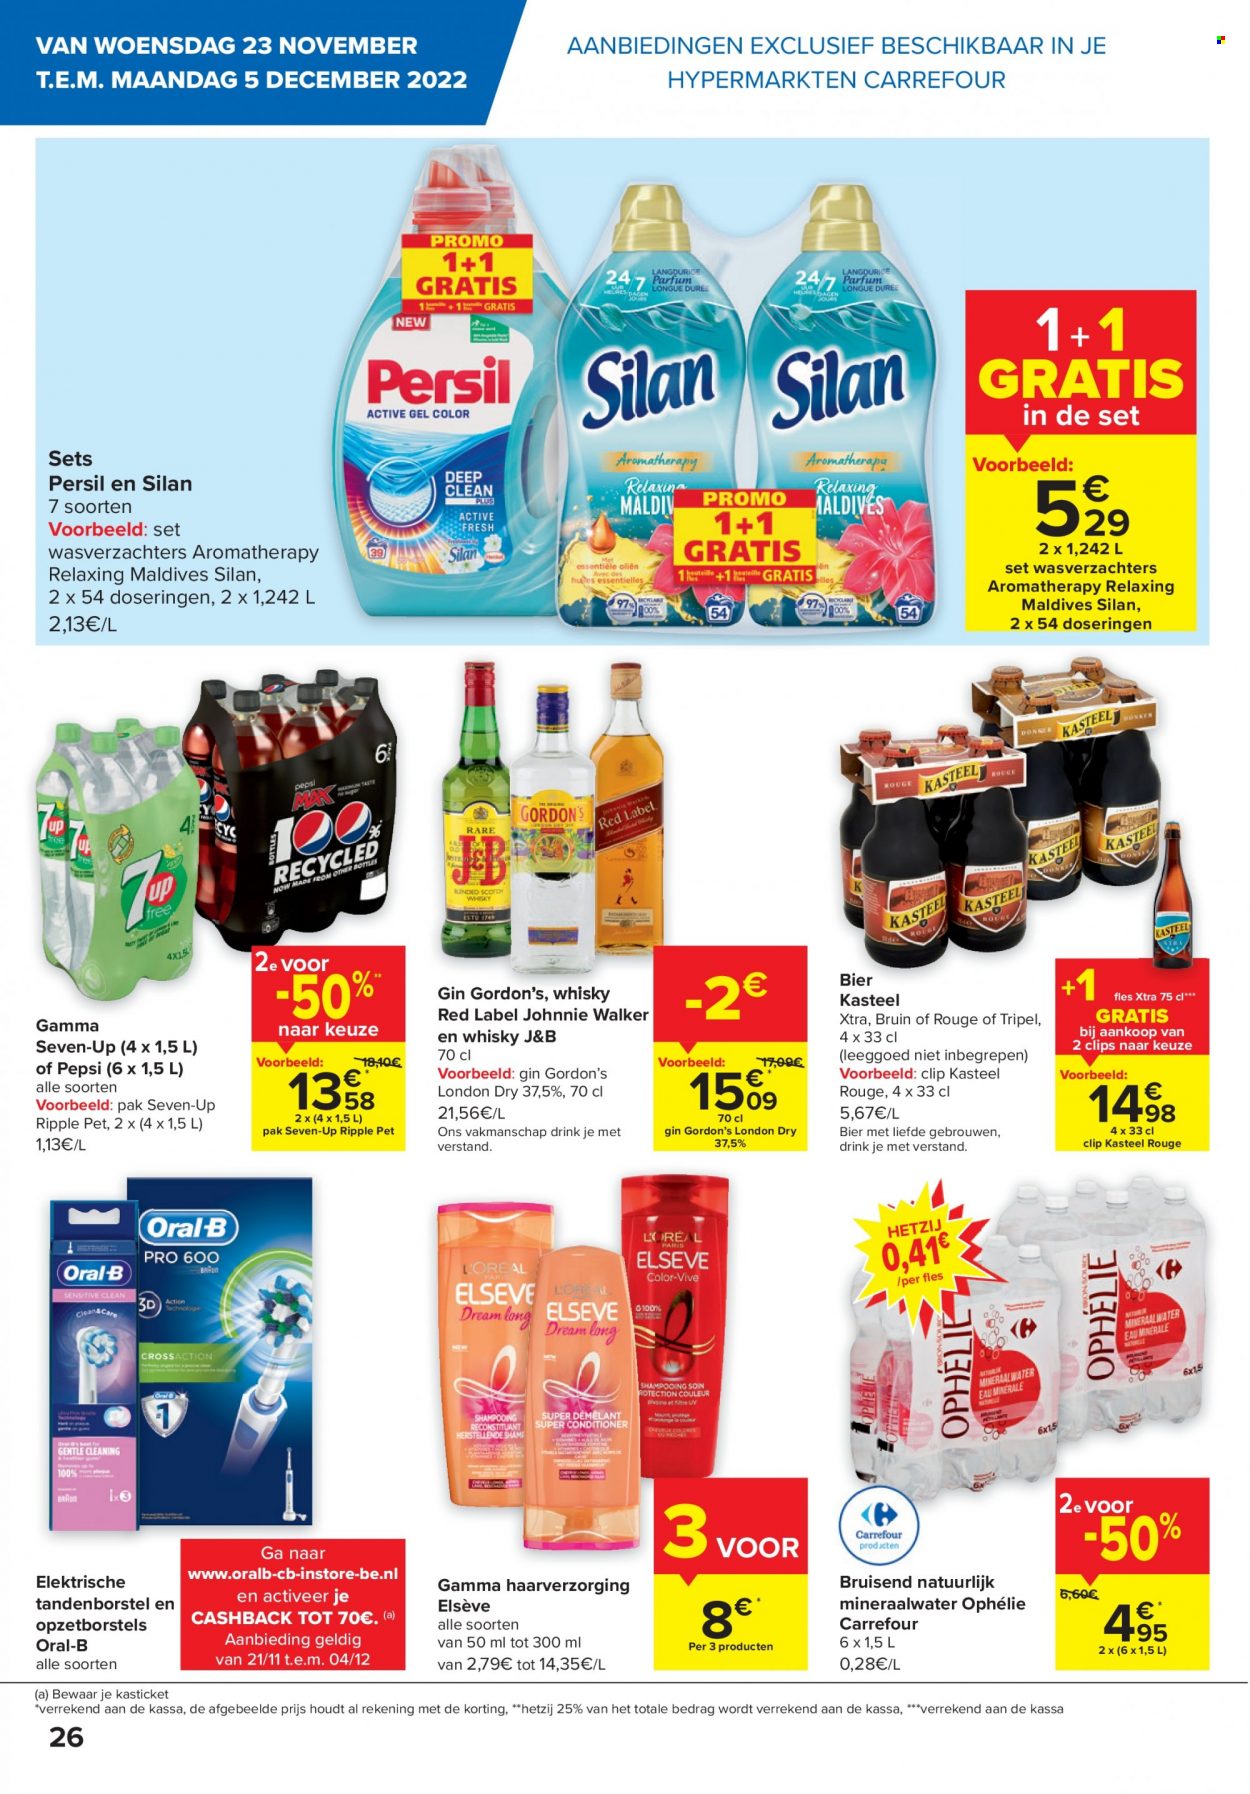 Catalogue Carrefour hypermarkt - 23.11.2022 - 5.12.2022. Page 26.